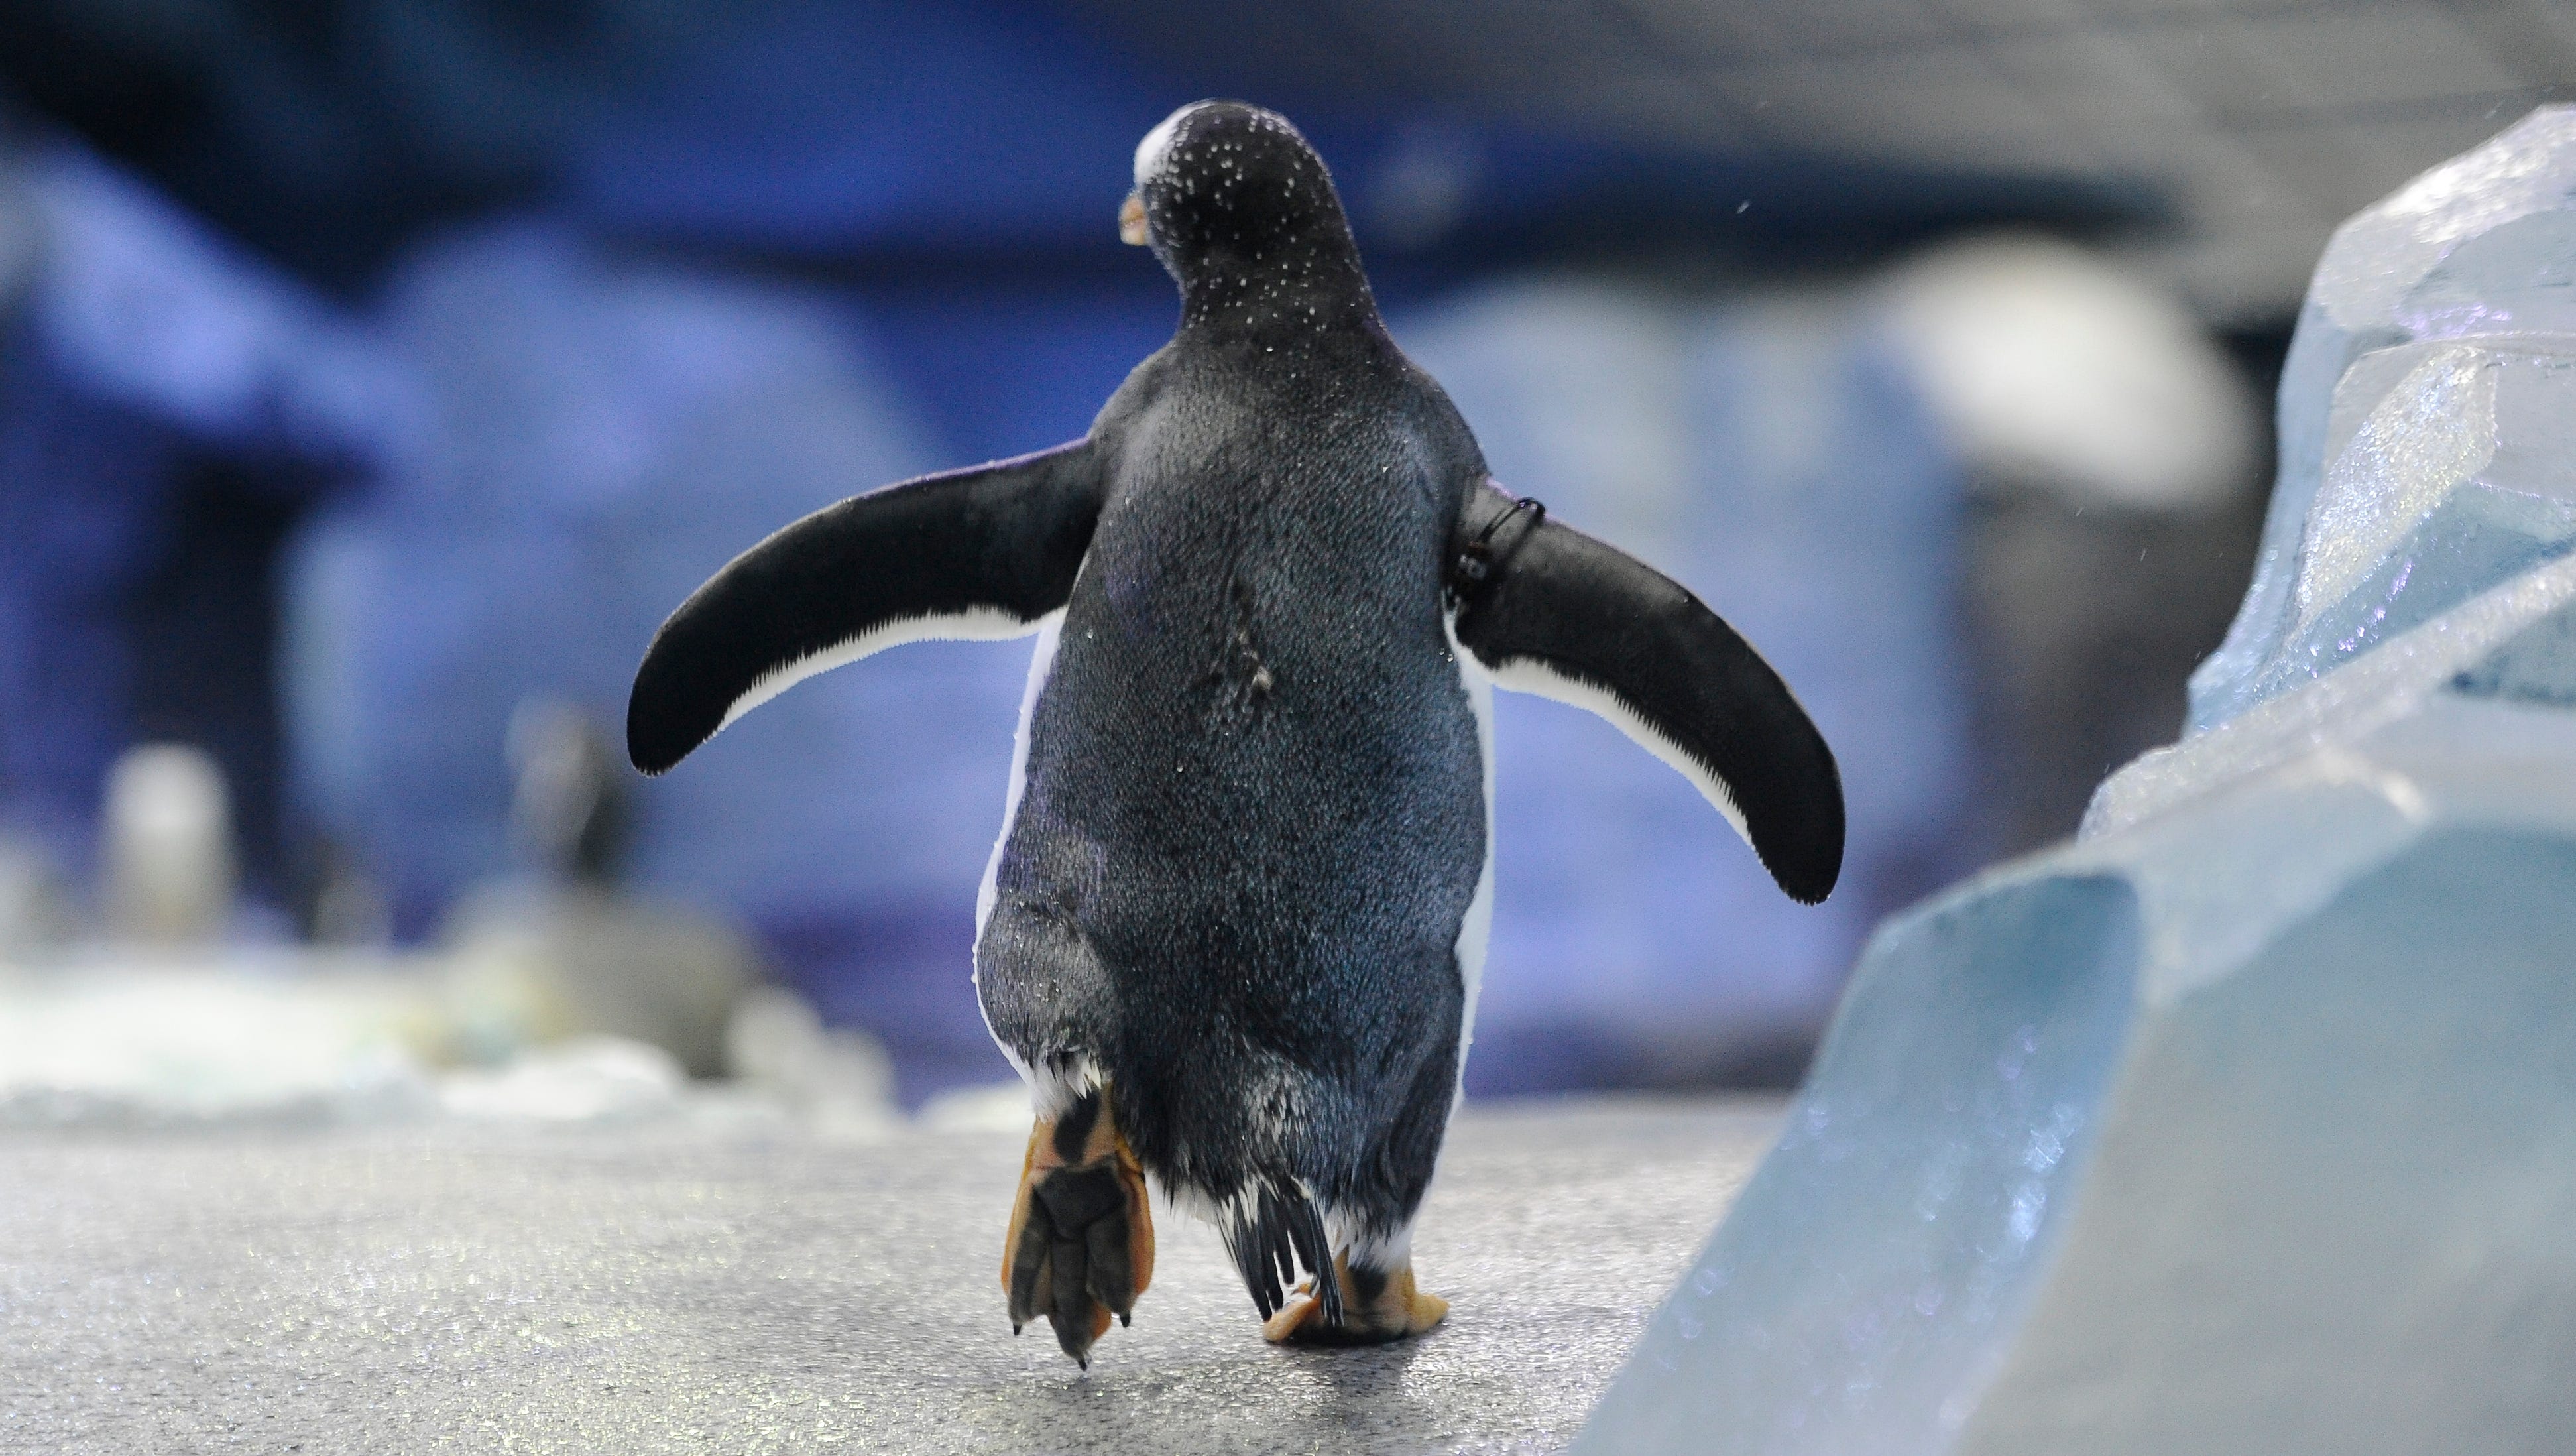 Penguins explore their new habitat at the Polk Penguin Conservation Center at the Detroit Zoo.